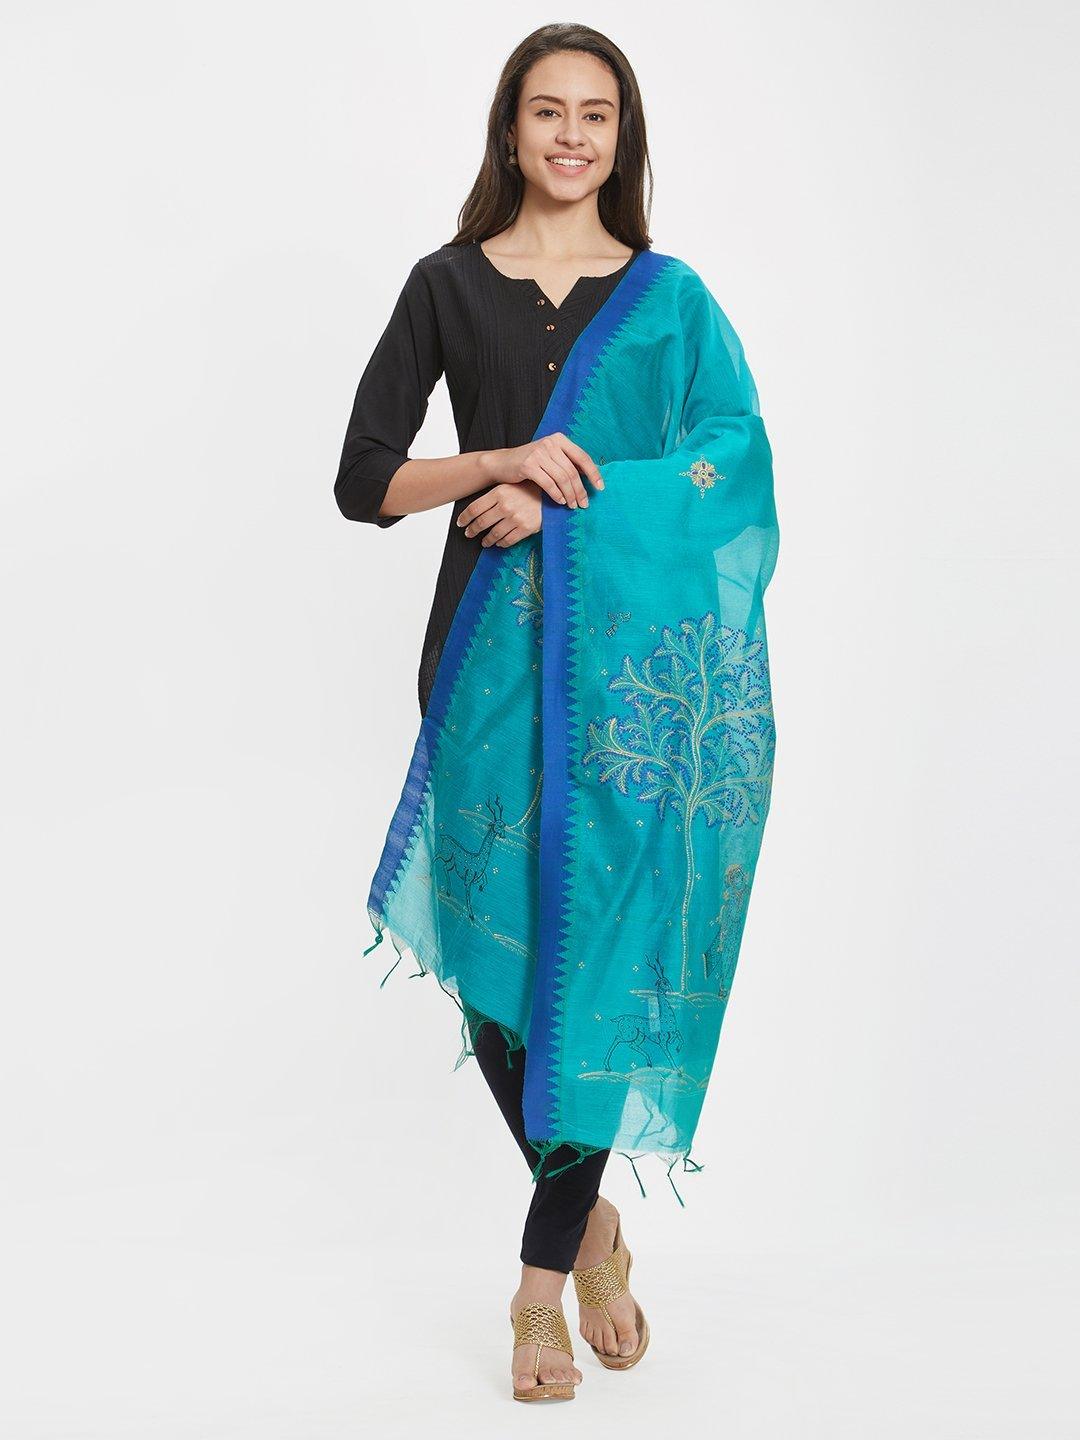 CraftsCollection.in - Blue Dupatta with handpainted Pattachitra motifs